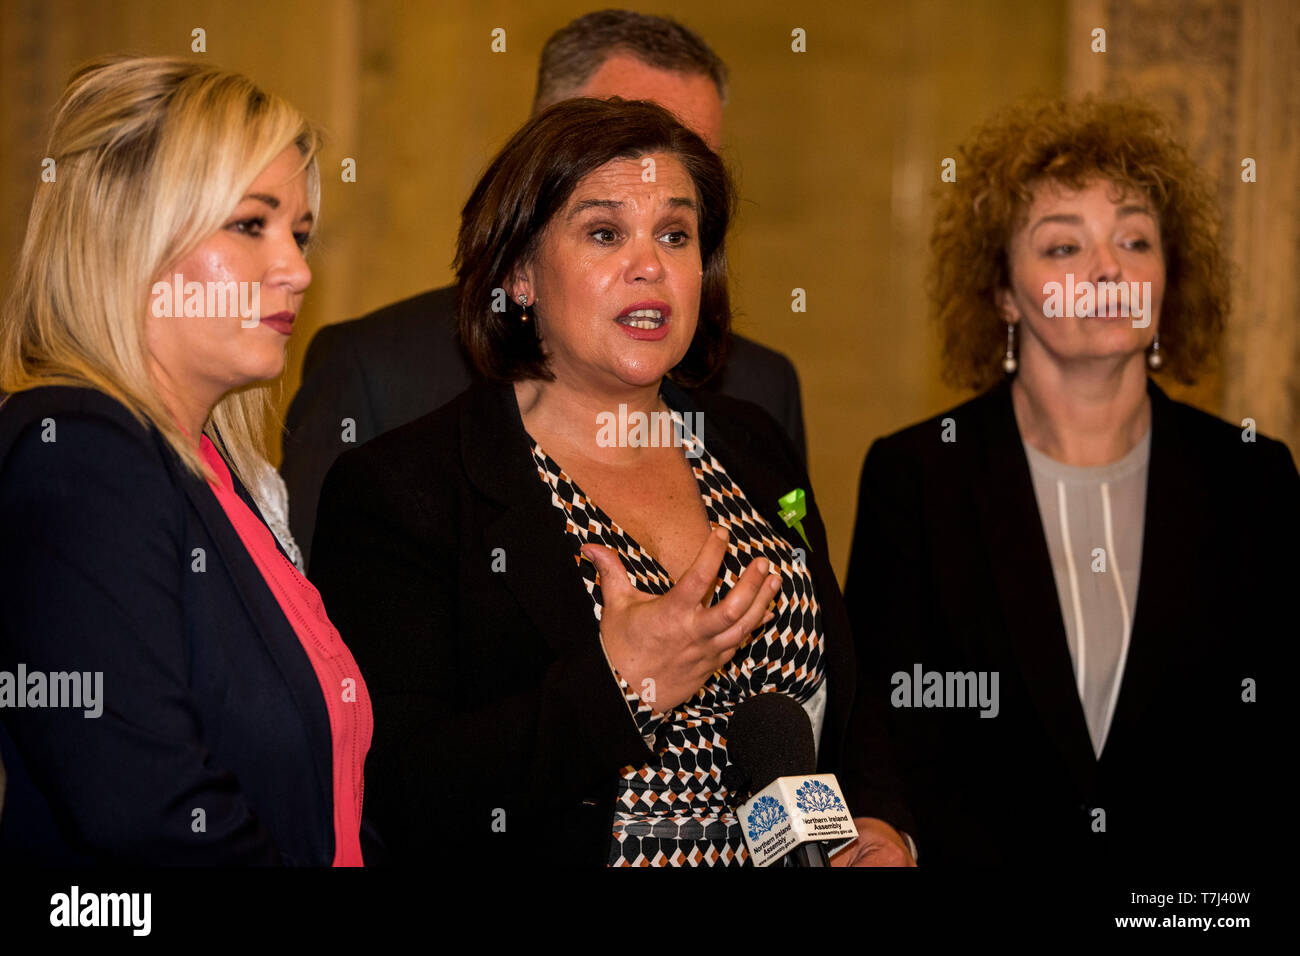 Sinn Fein leader Mary Lou McDonald (centre) with party colleagues Michelle O'Neill (left)and Caral Ni Chuilin (right) speaking to the media in Stormont's Great Hall after earlier talks at Stormont House in the latest round of discussions to restore the Stormont Goverment. Stock Photo